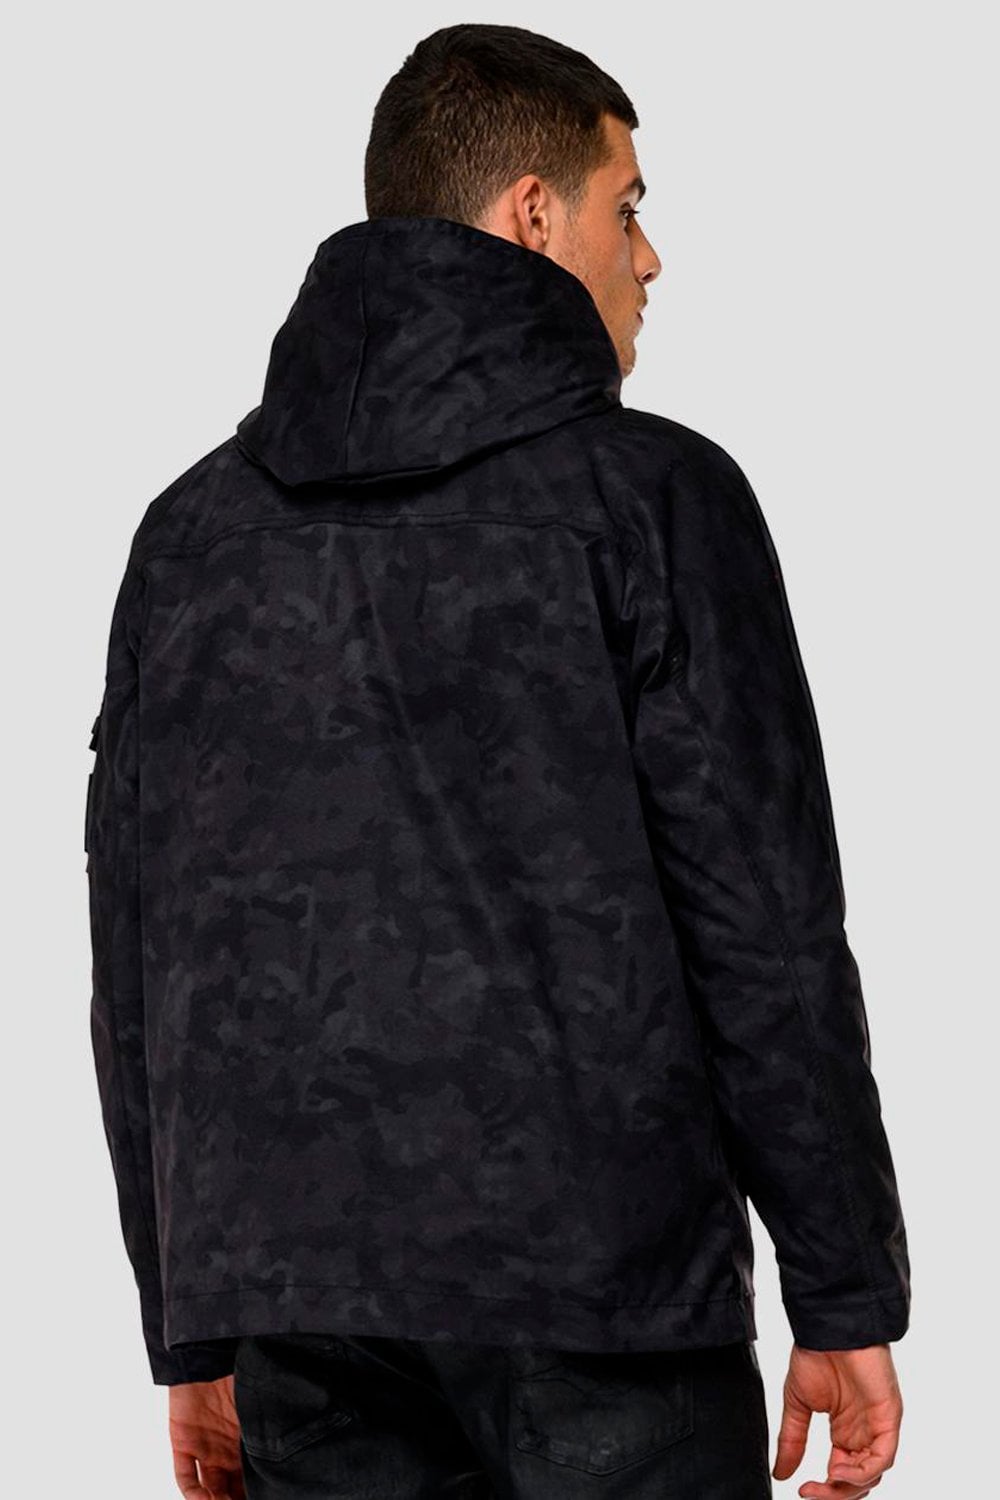 Buy the Replay Hooded Jacket in Black Camo at Intro. Spend £50 for free UK delivery. Official stockists. We ship worldwide.